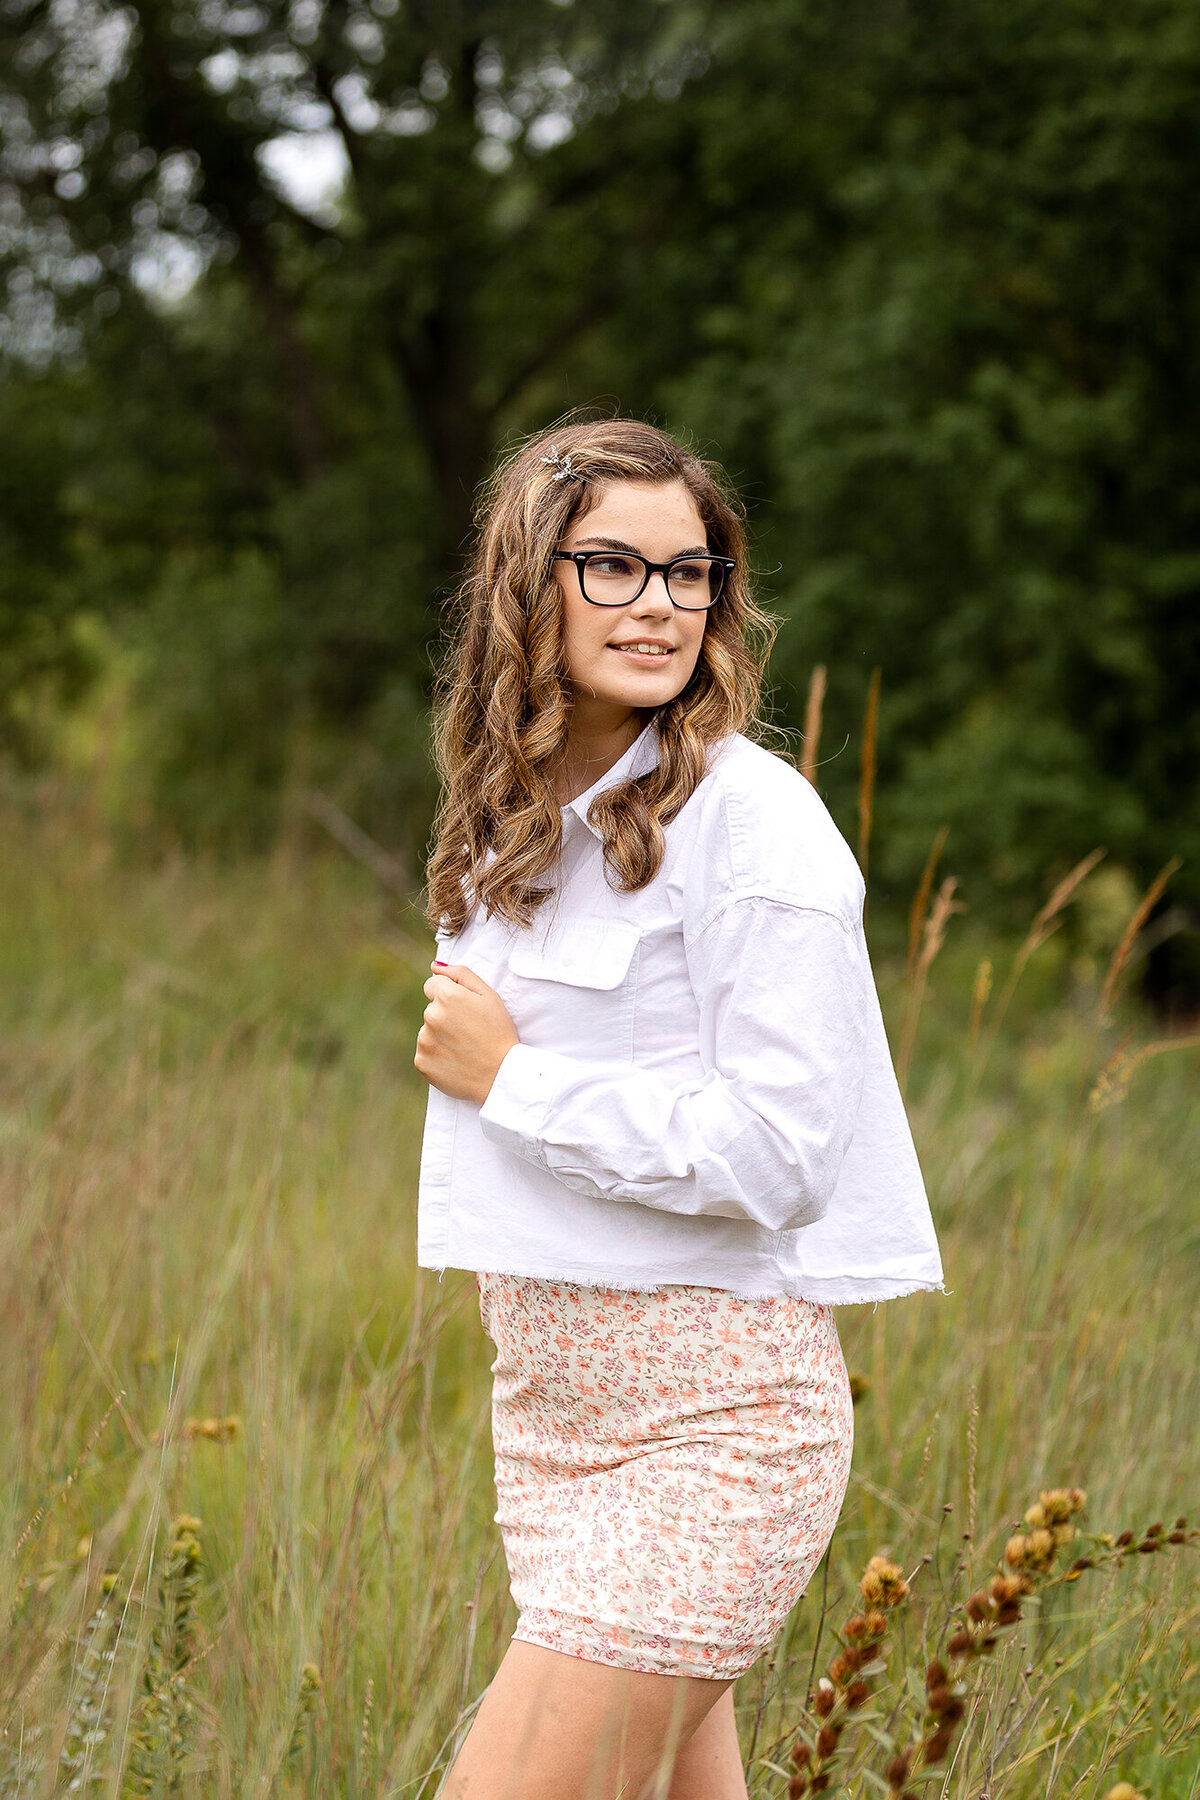 Beautiful girl with glasses wearing a floral dress with a white denim jacket walks among prairie grasses.